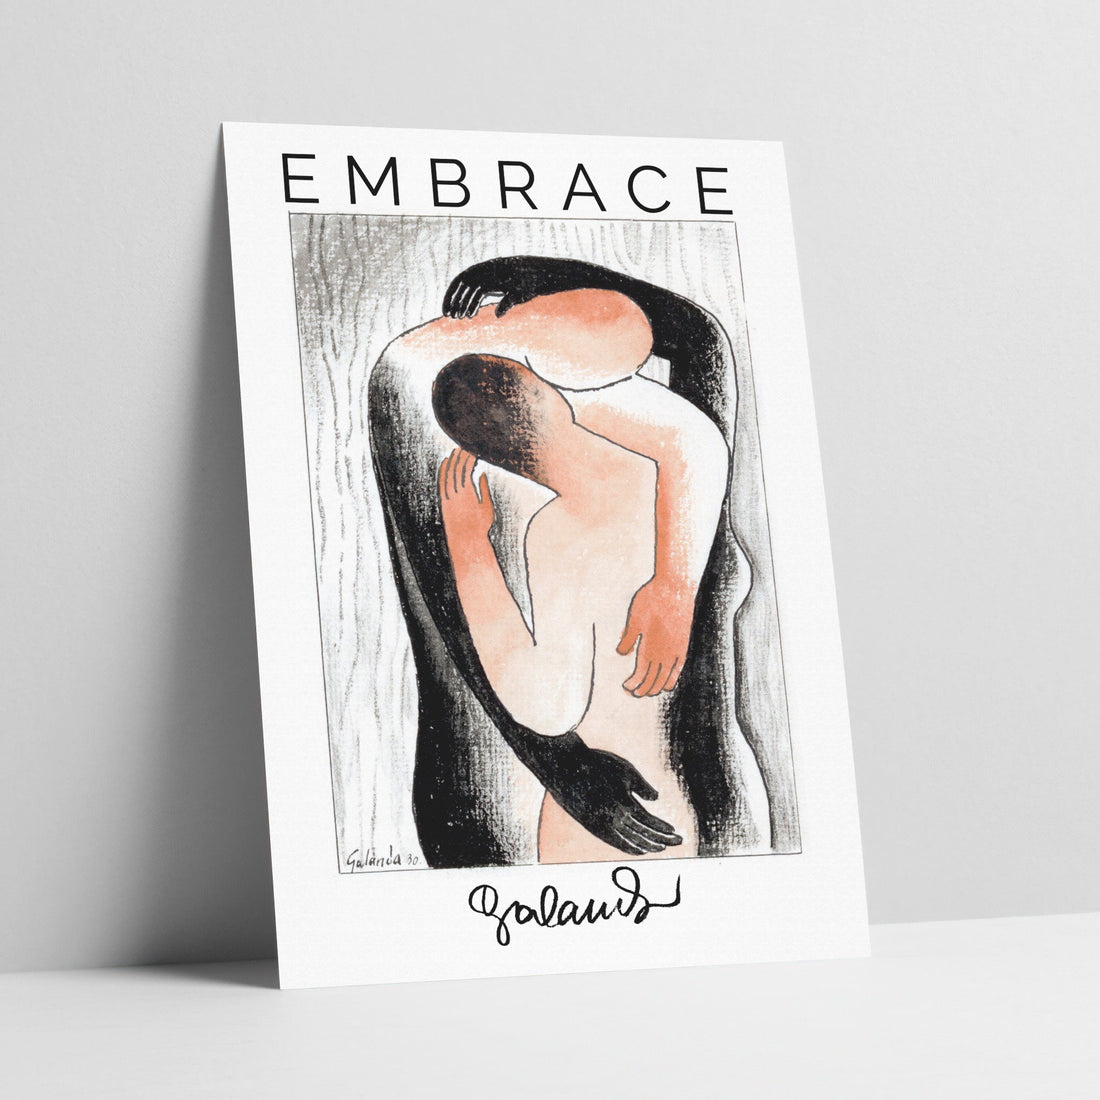 Embrace - Gallery / Exhibition Poster Art Print